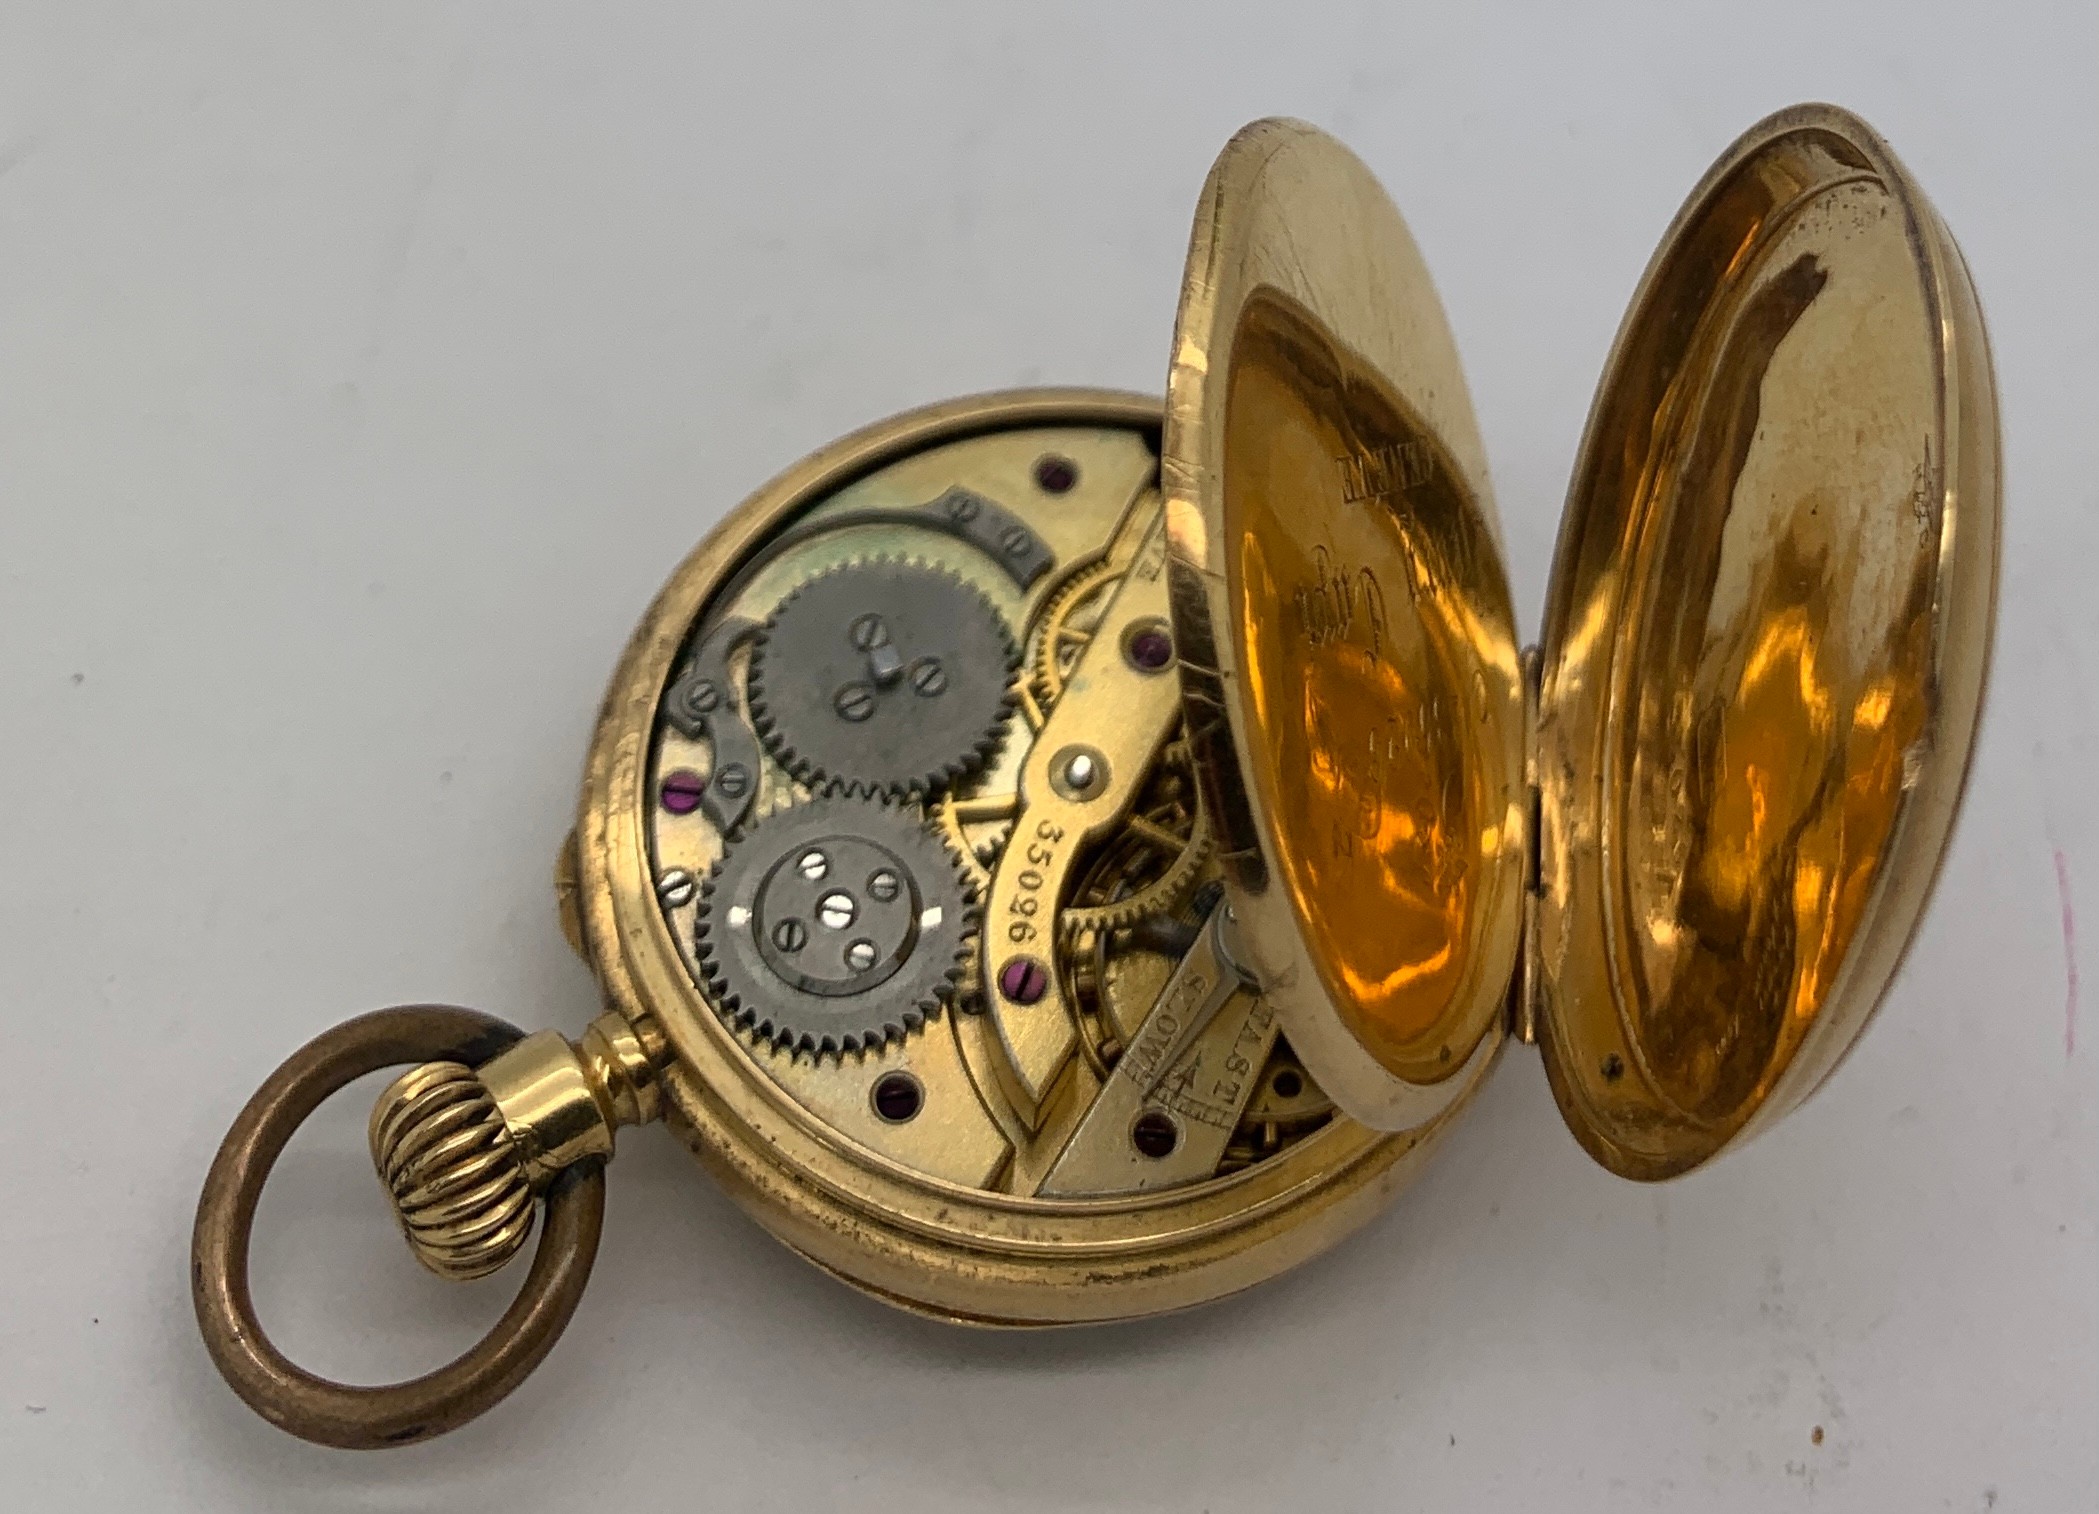 Ladies pocket watch by Henry Capt Geneve. case diameter approx. 33mms. weight 31.3gms - Image 4 of 4